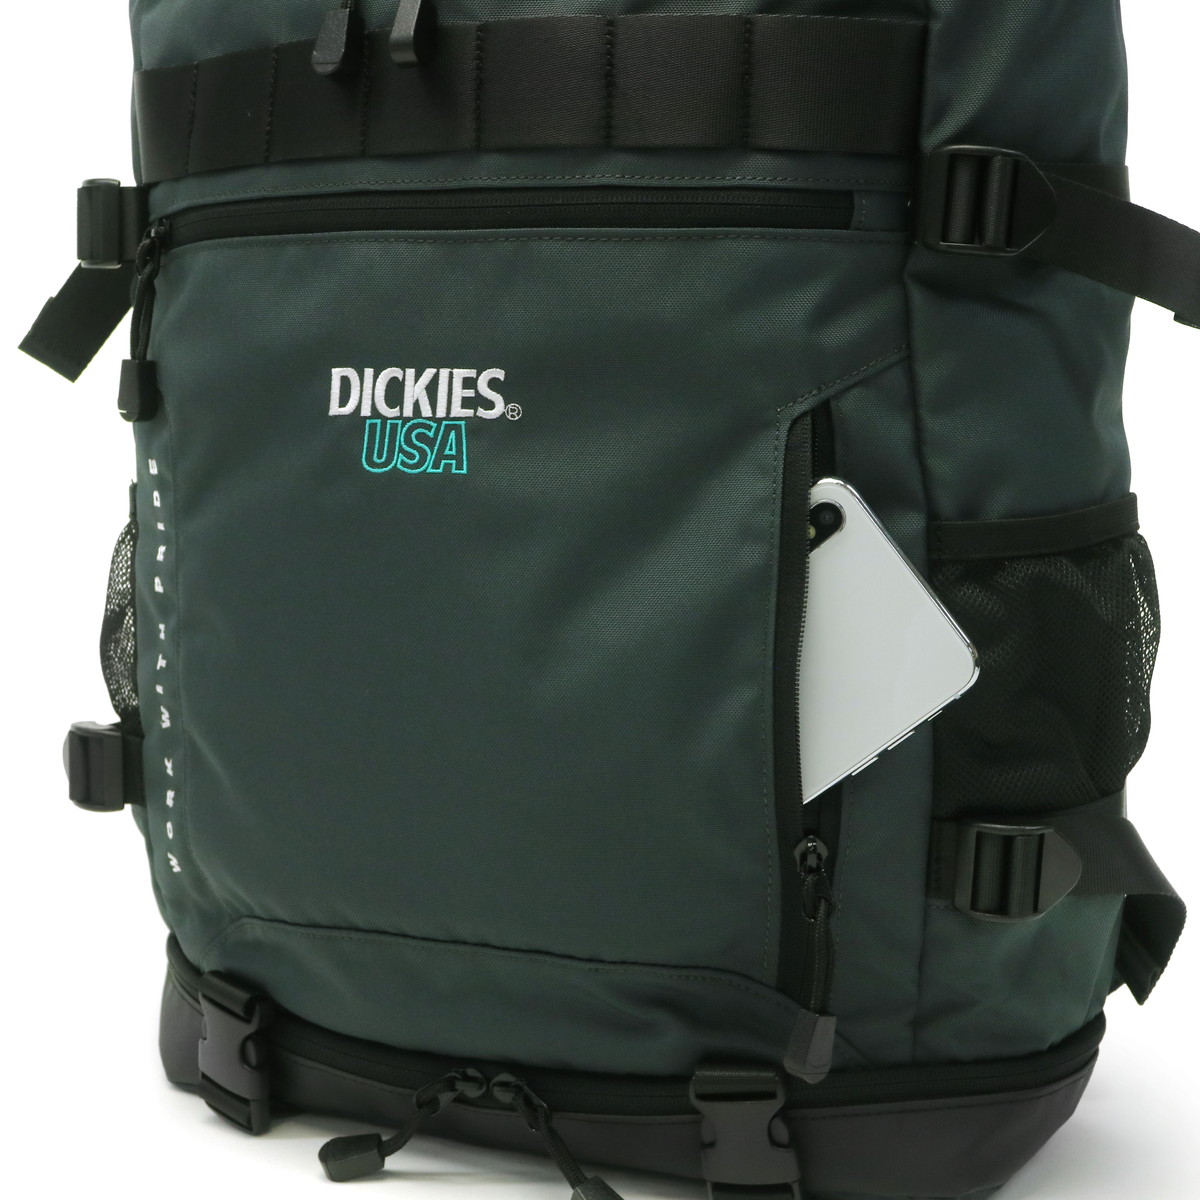 Dickies ディッキーズ USA EMB BOX BACKPACK リュックサック 14738600 